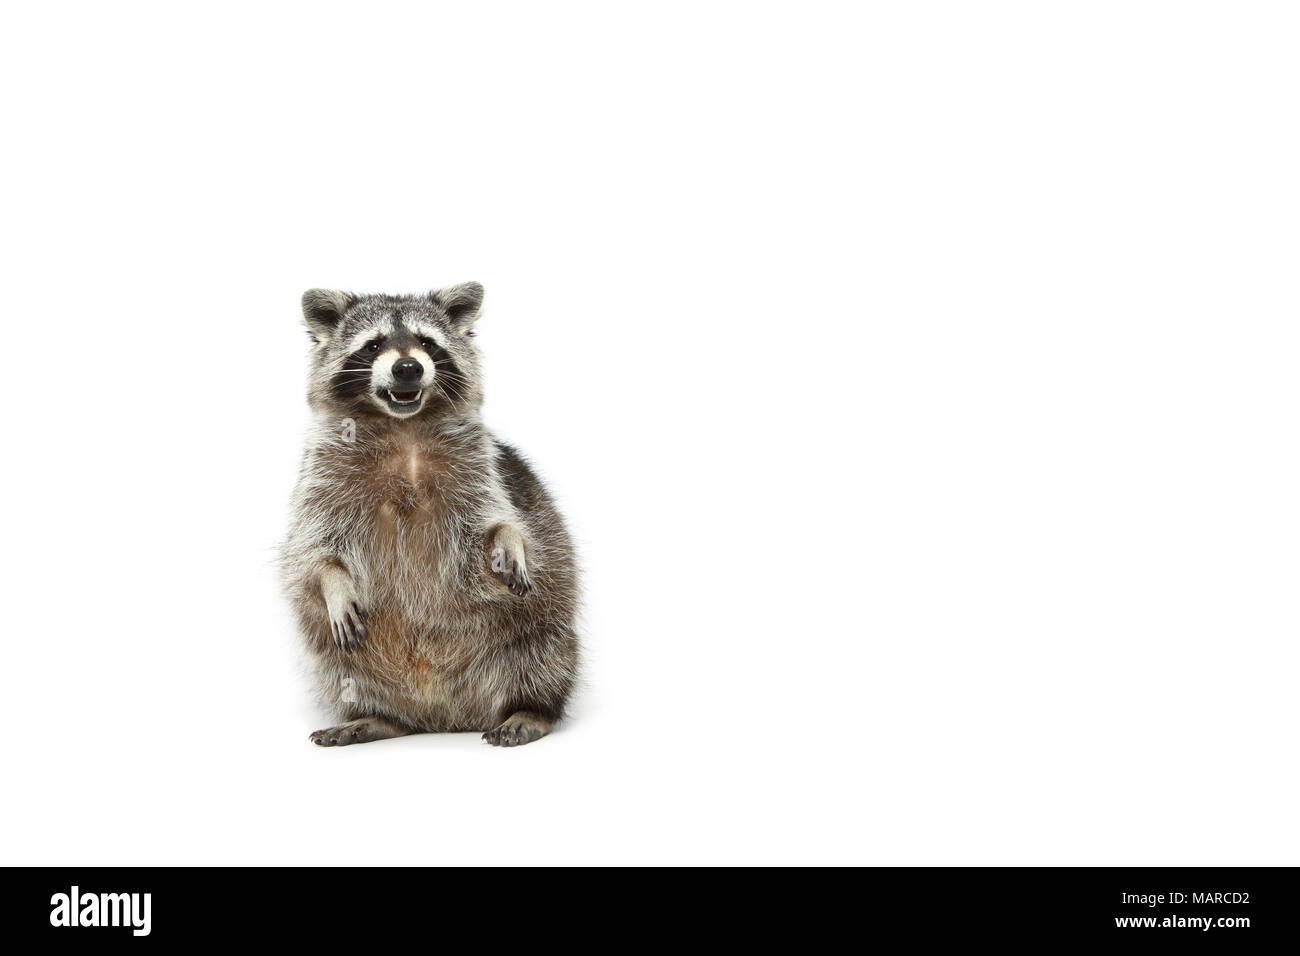 Raccoon (Procyon lotor). Adult sitting on its haunches. Studio picture against a white background. Germany Stock Photo